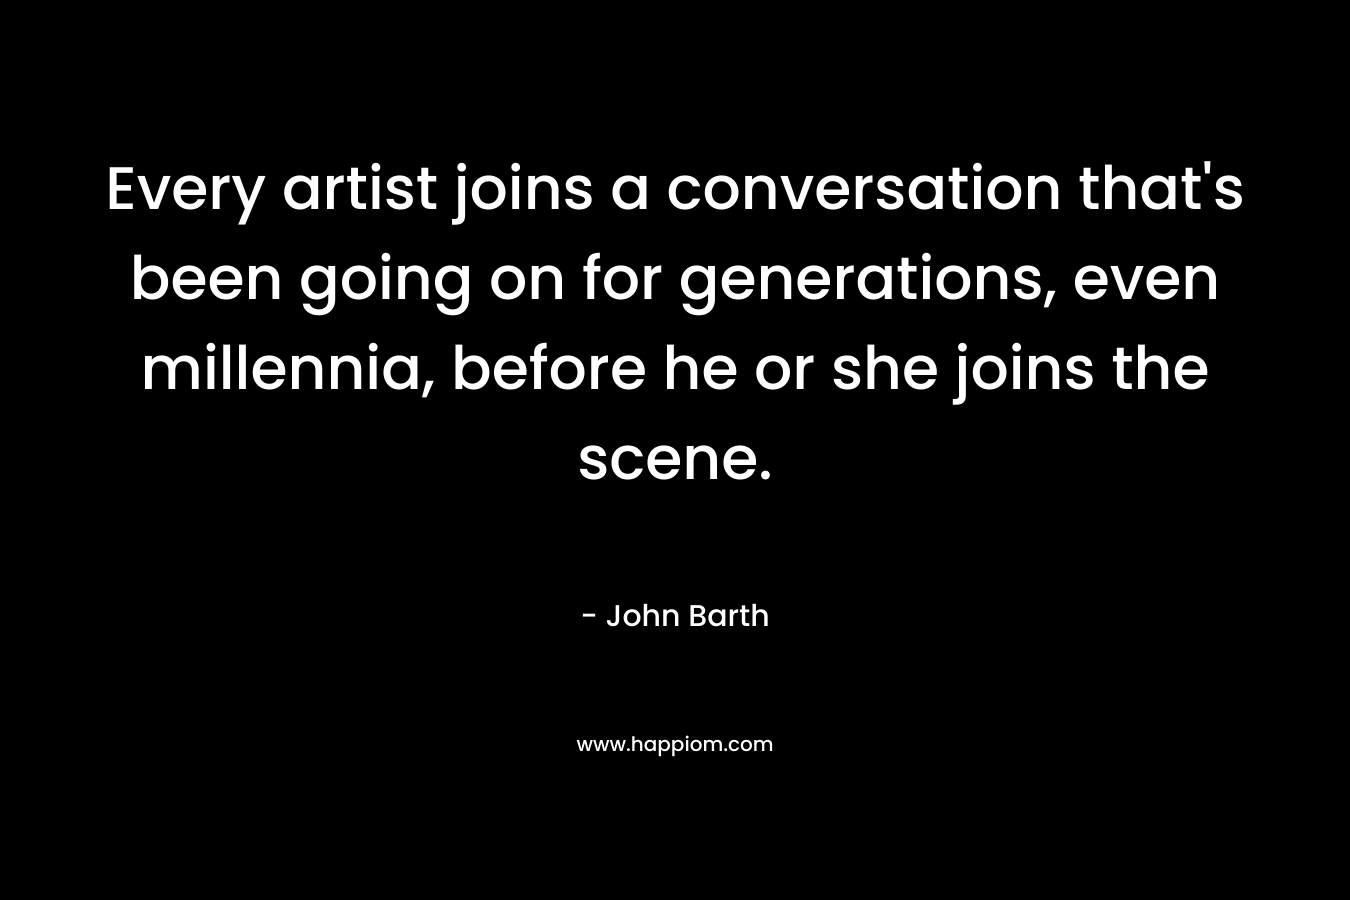 Every artist joins a conversation that’s been going on for generations, even millennia, before he or she joins the scene. – John Barth